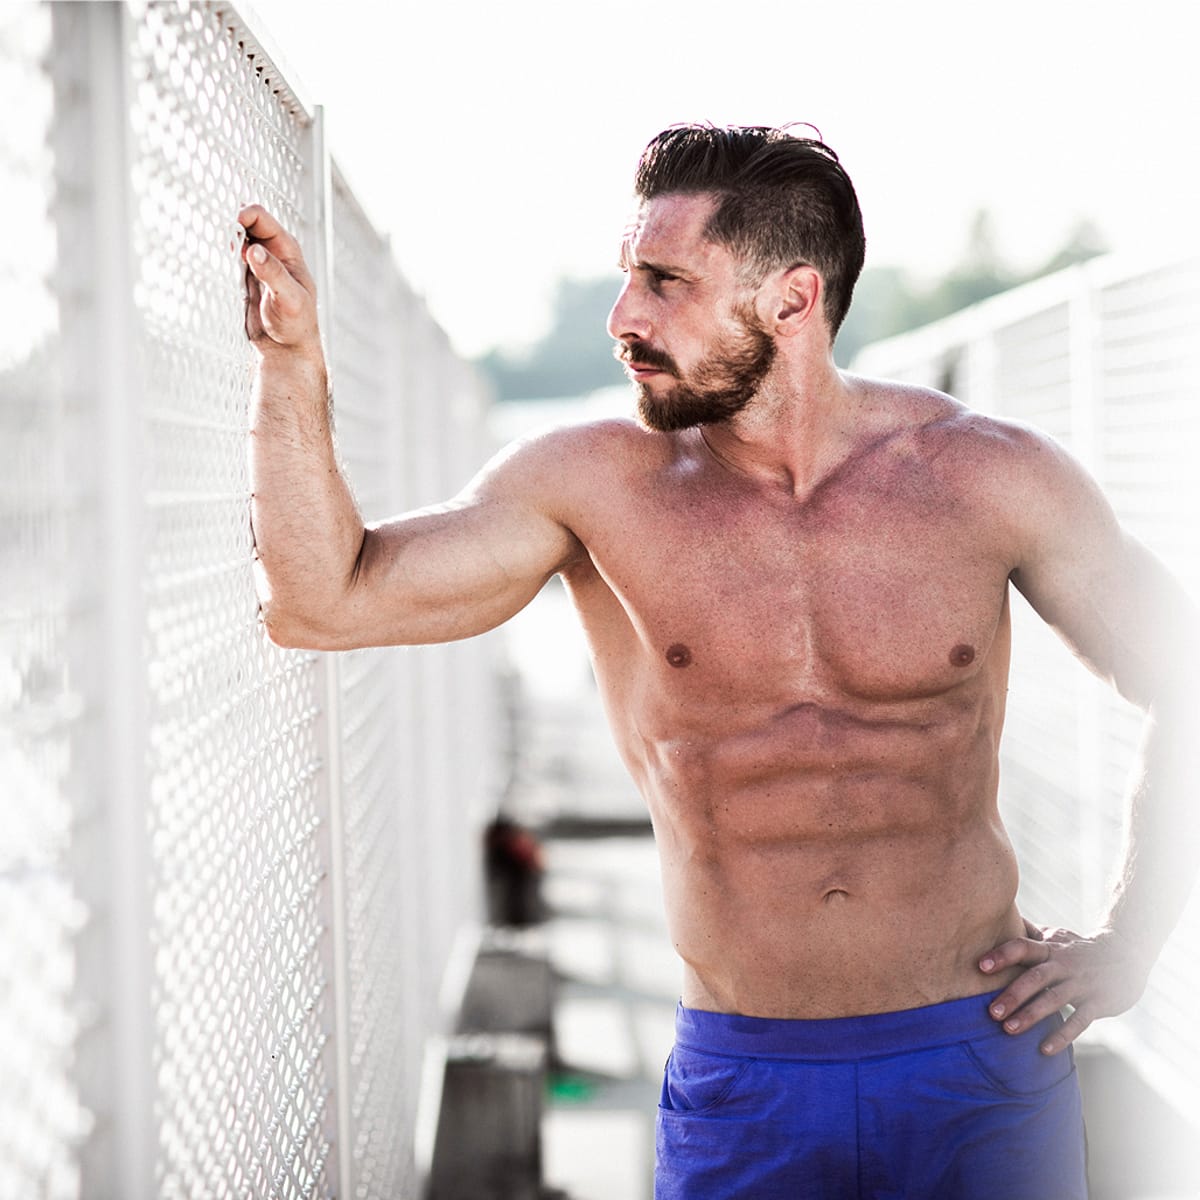 FAT LOSS 101 FOR MEN (Chest Fat, Belly, Love Handles!) 